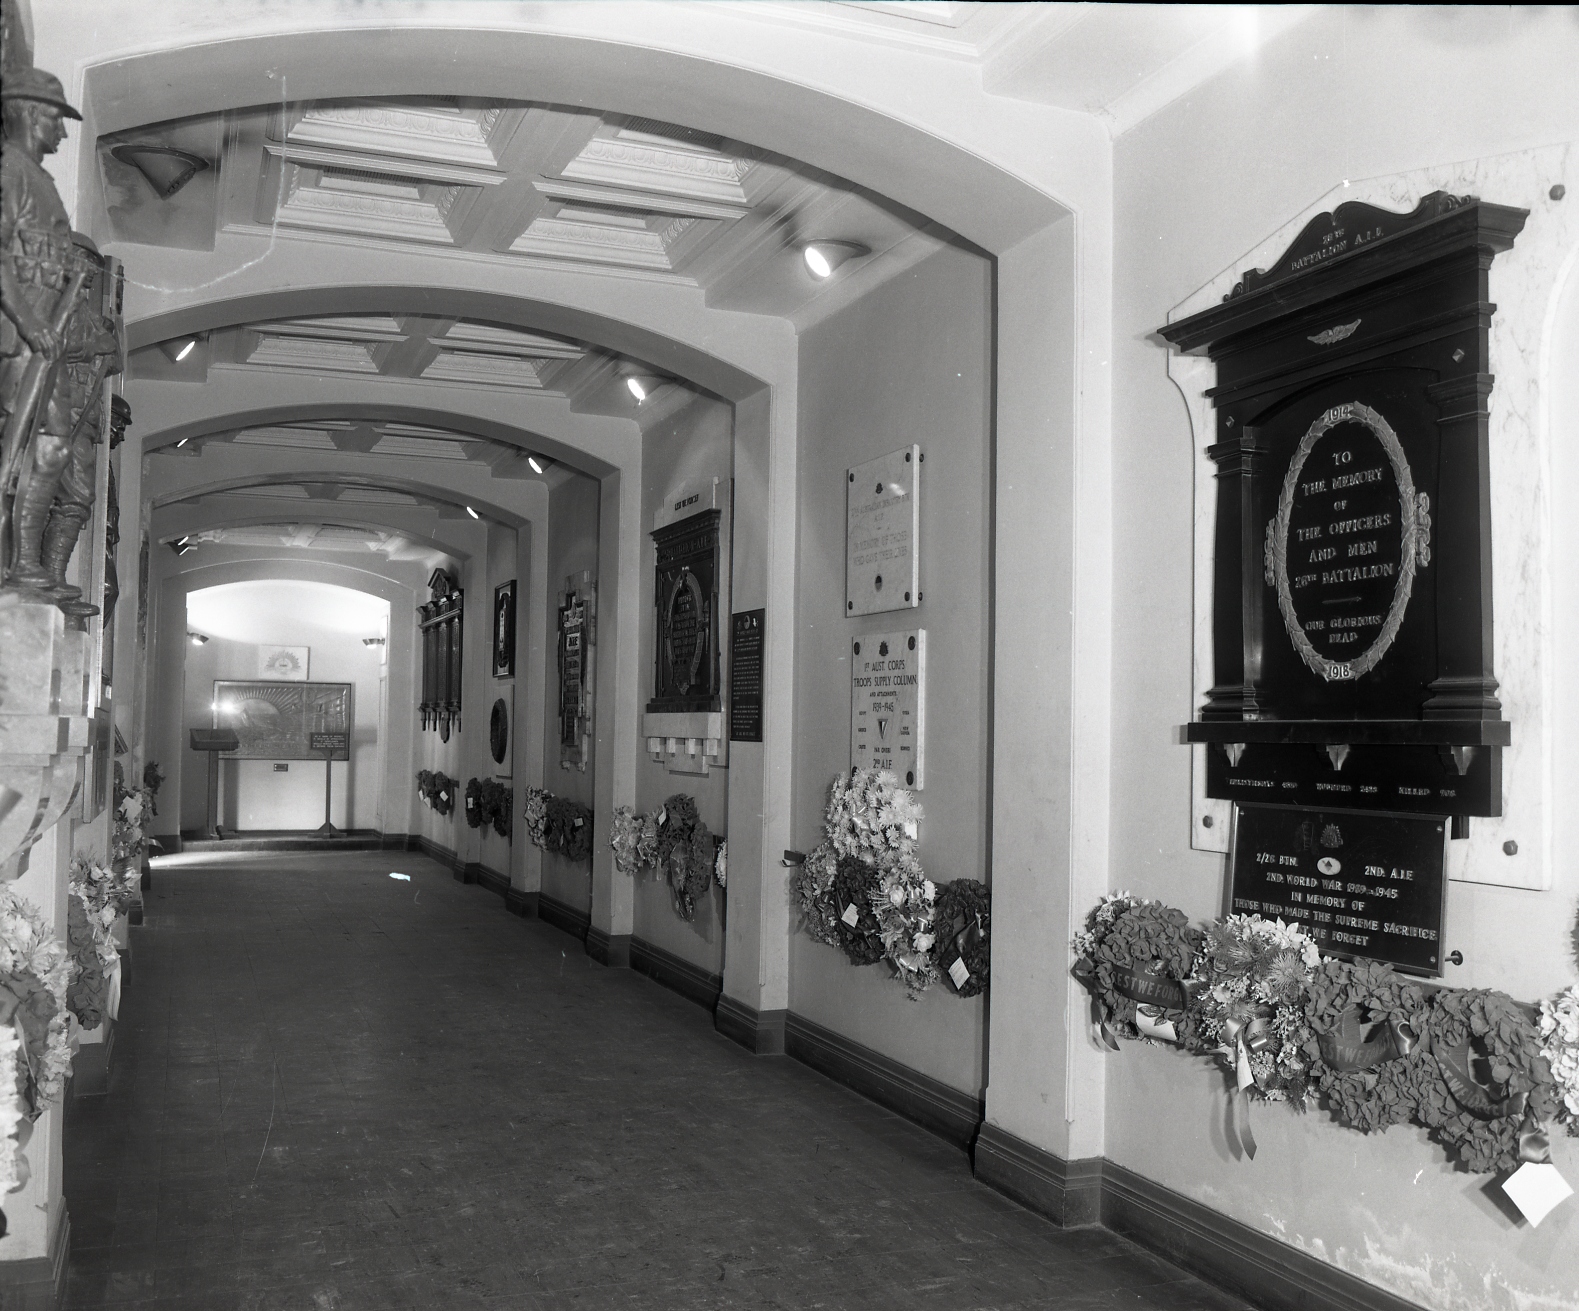 Interior black and white image of the crypt corridor focusing on the right hand side wall, showing wreaths and plaques.